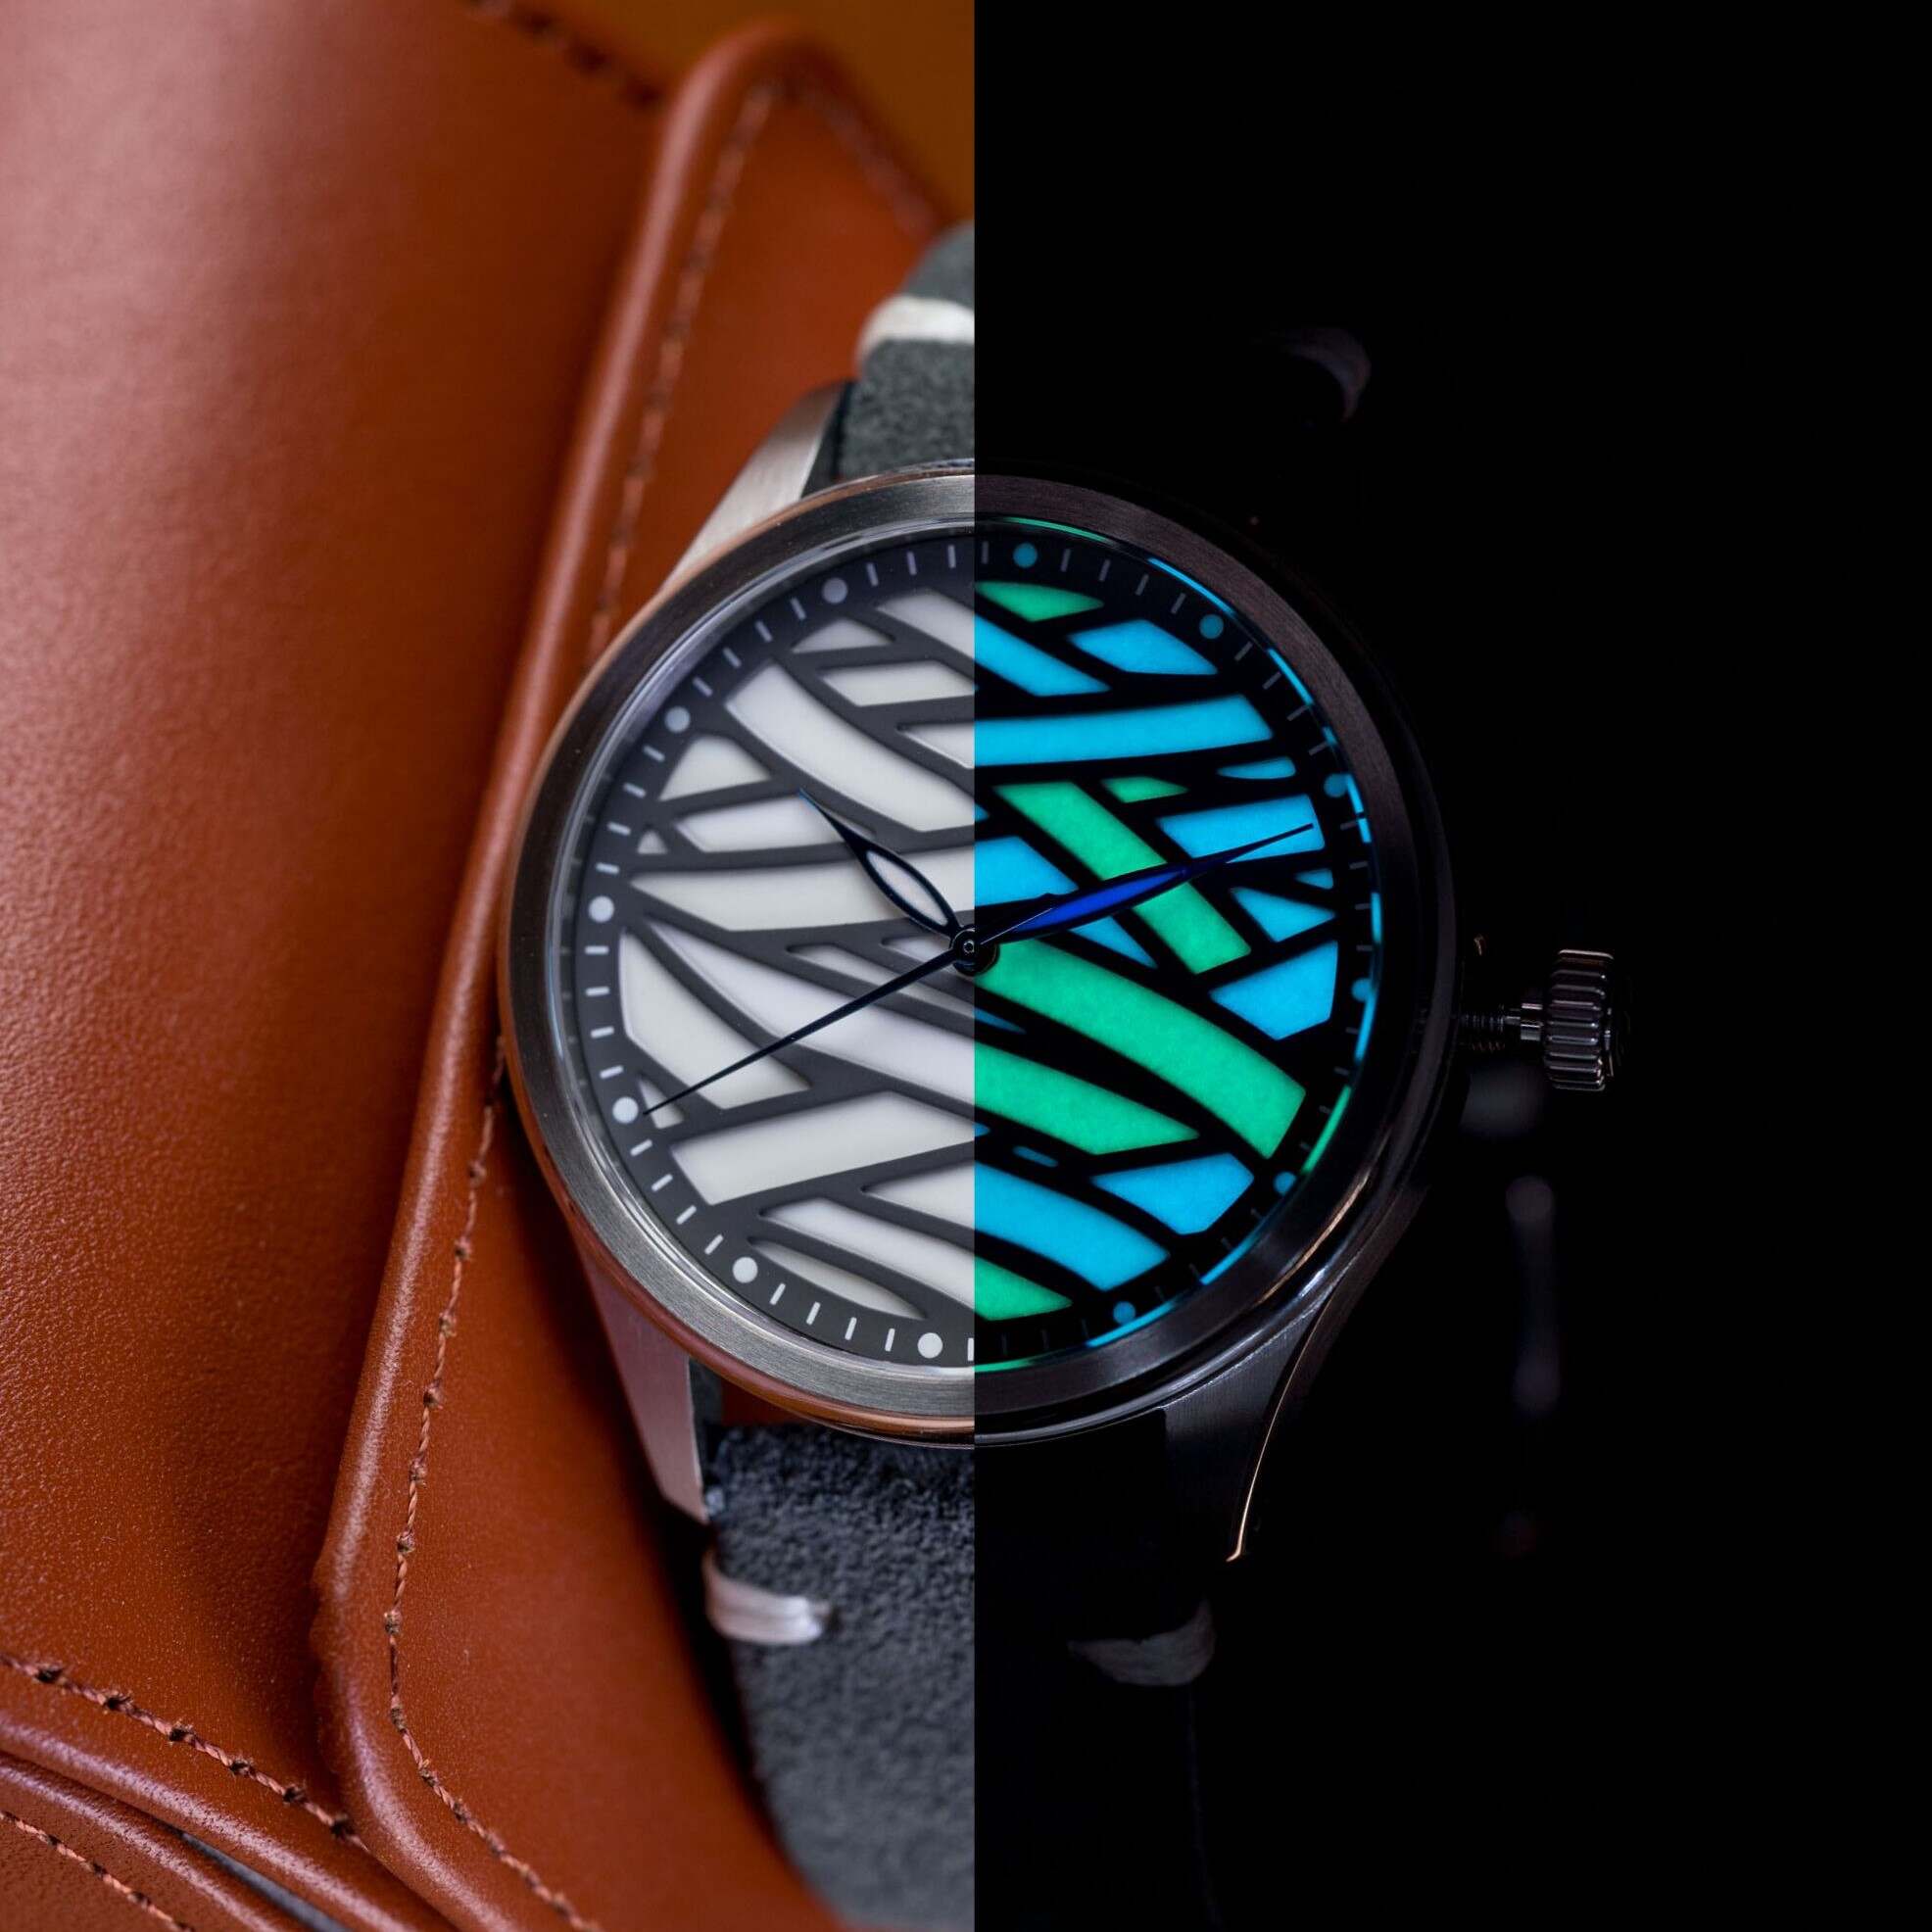 contrast high lume watch dial like stained glass with multiple different colors